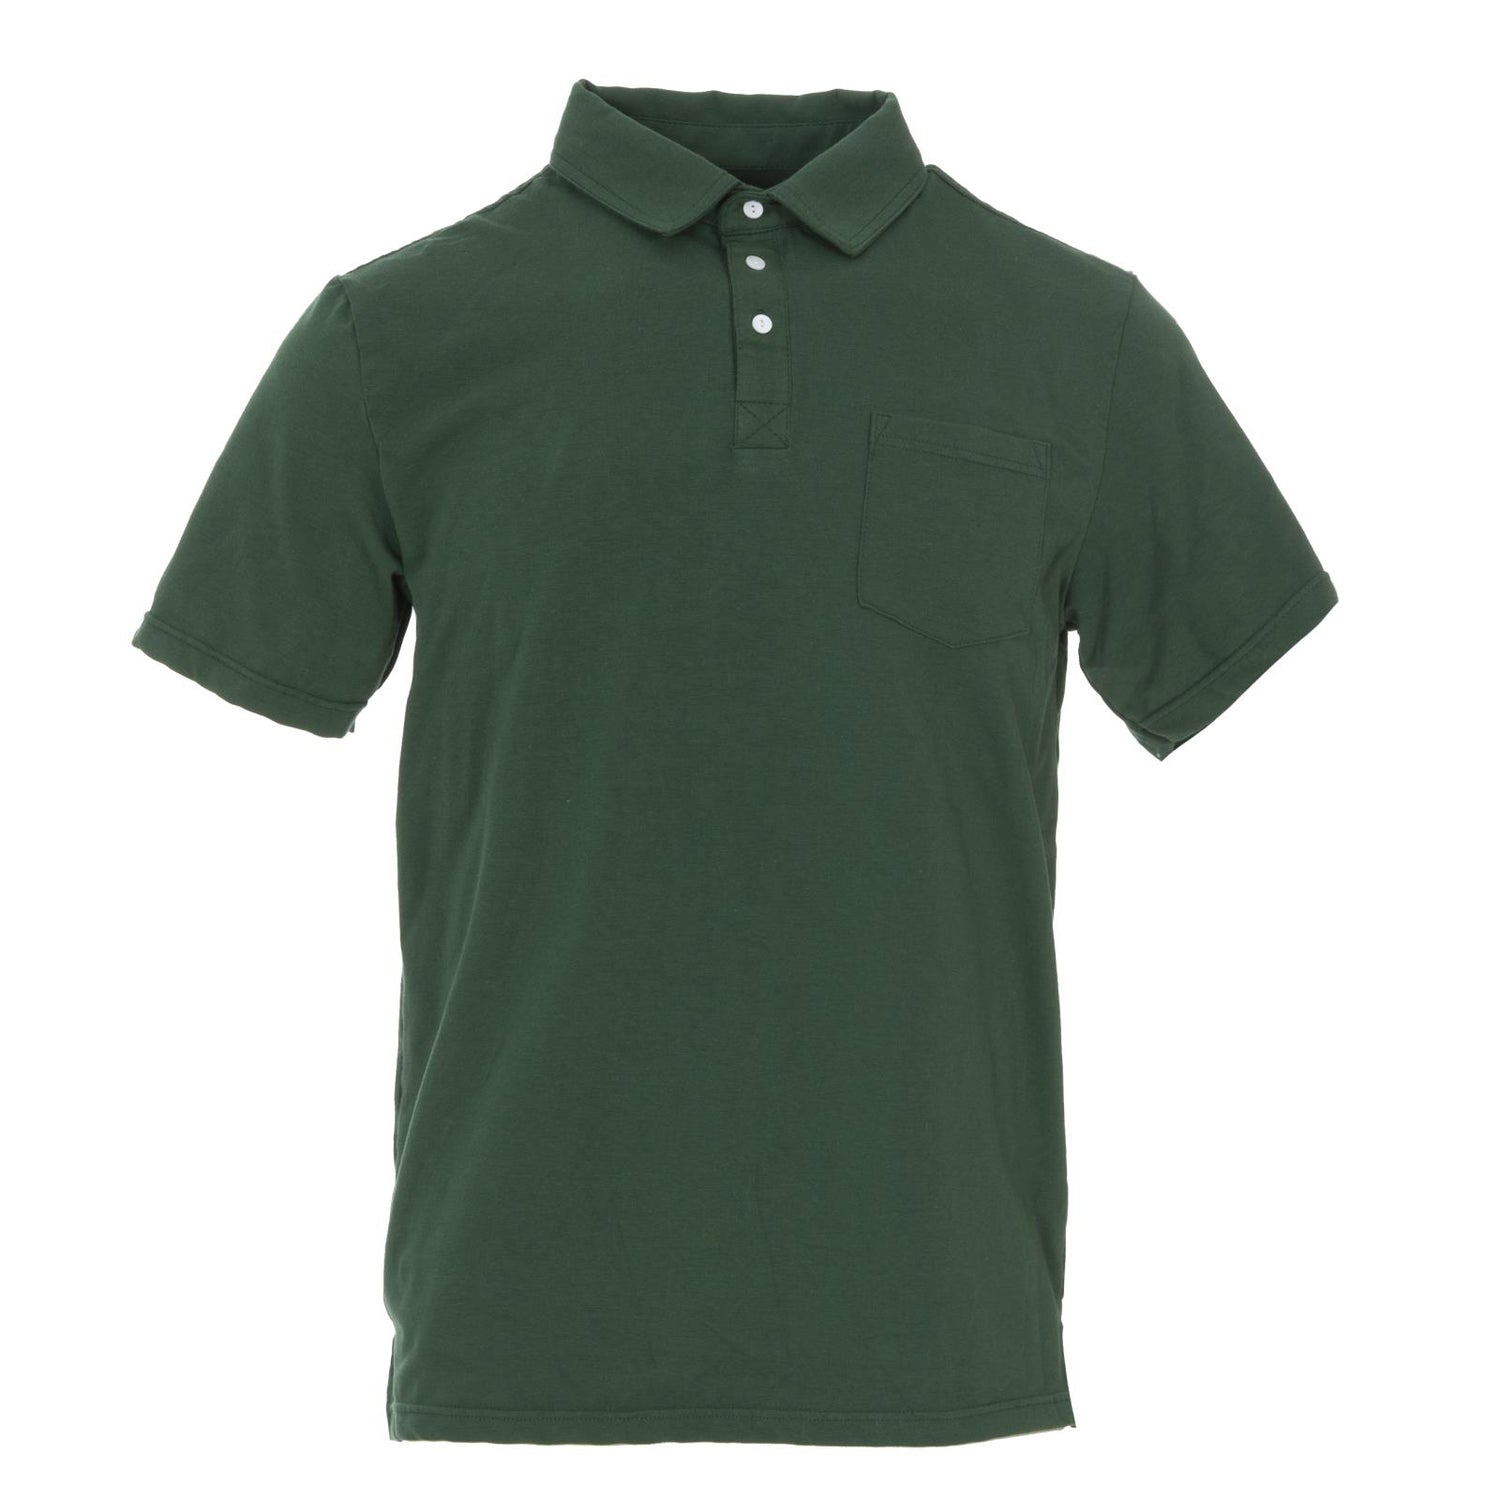 Men's Short Sleeve Luxe Jersey Polo with Pocket in Topiary